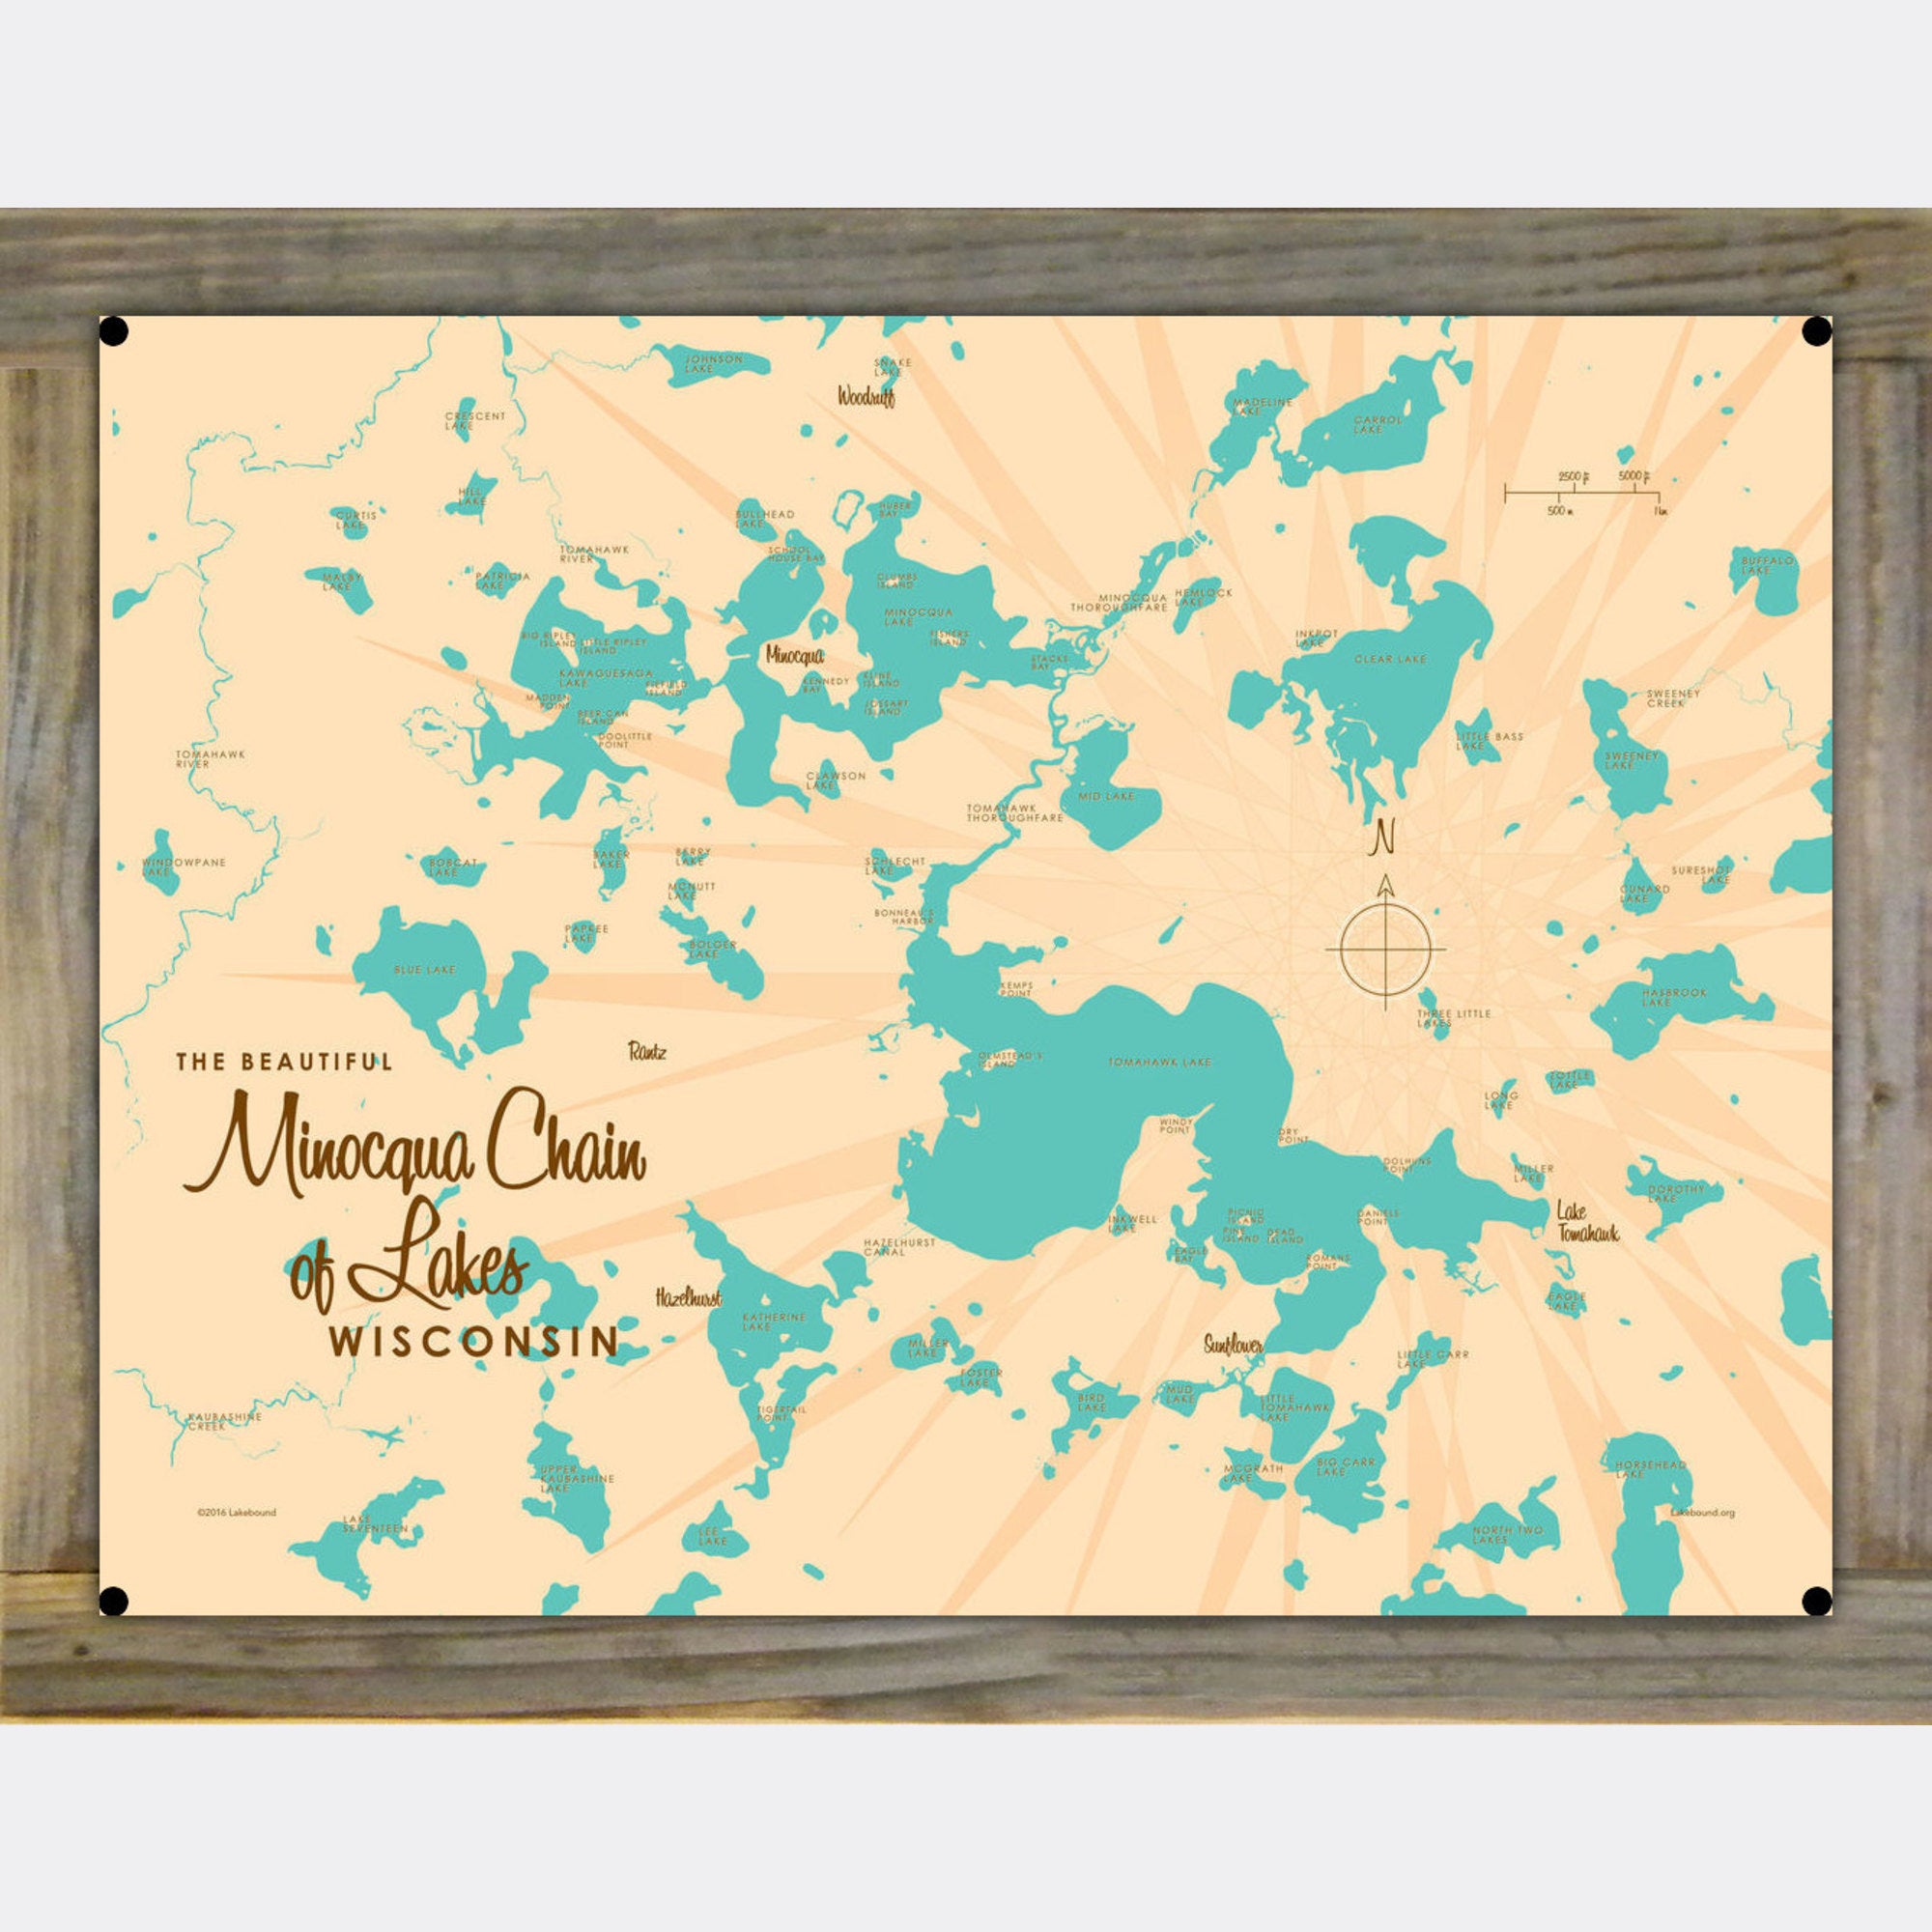 Minocqua Chain of Lakes Wisconsin, Wood-Mounted Metal Sign Map Art